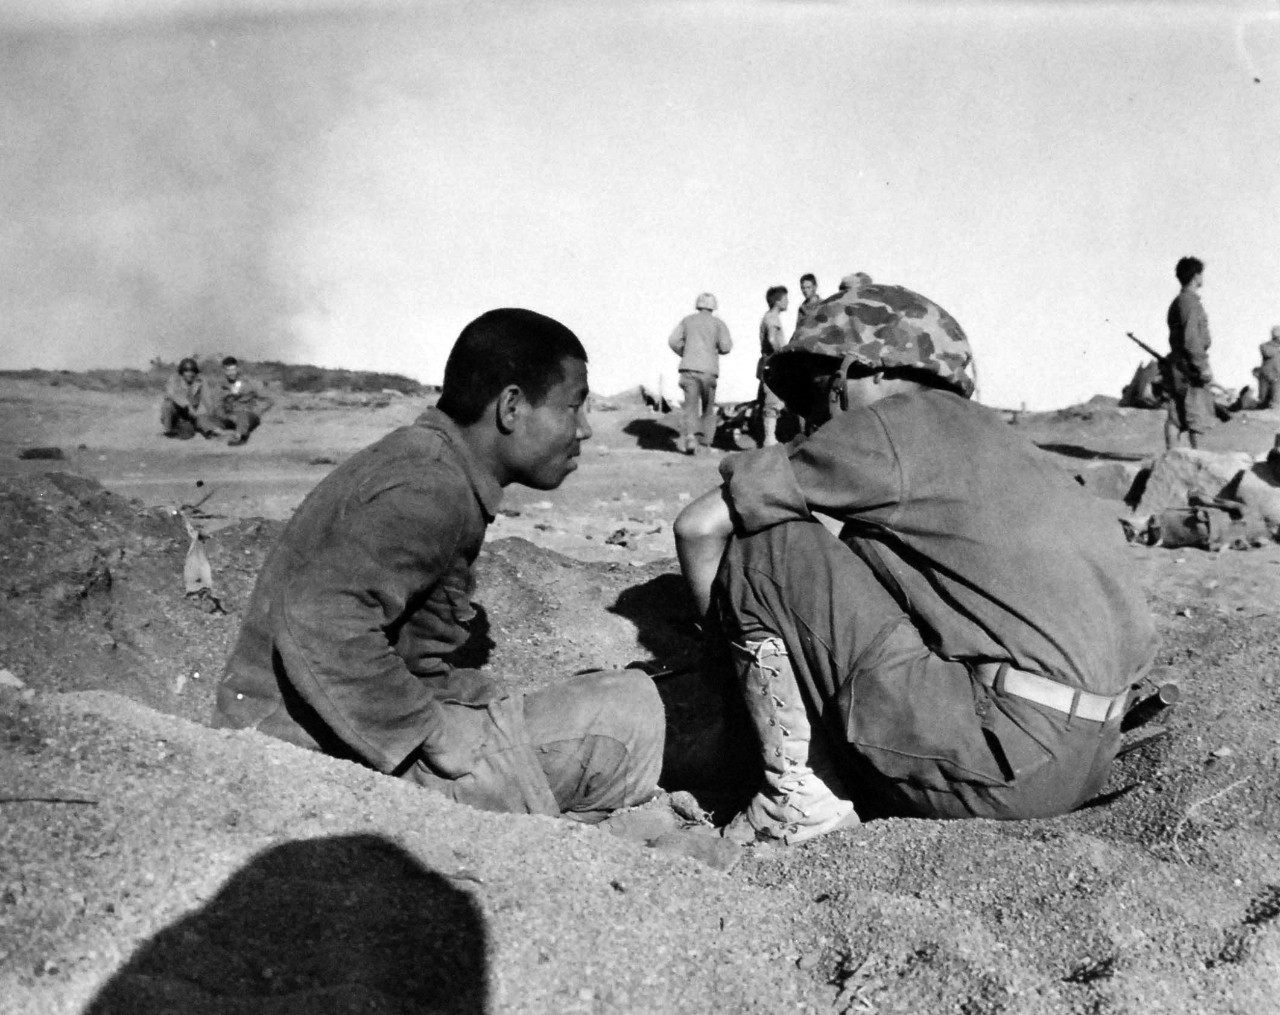 127-GW-327-112617:   Battle for Iwo Jima, February 1945.   Japanese Prisoner of War target area.  Photographed by Sergeant Scheer, 1 March 1945.  Official U.S. Marine Corps Photograph, now in the collection of the Nationnal Archives.  (2014/06/19).    